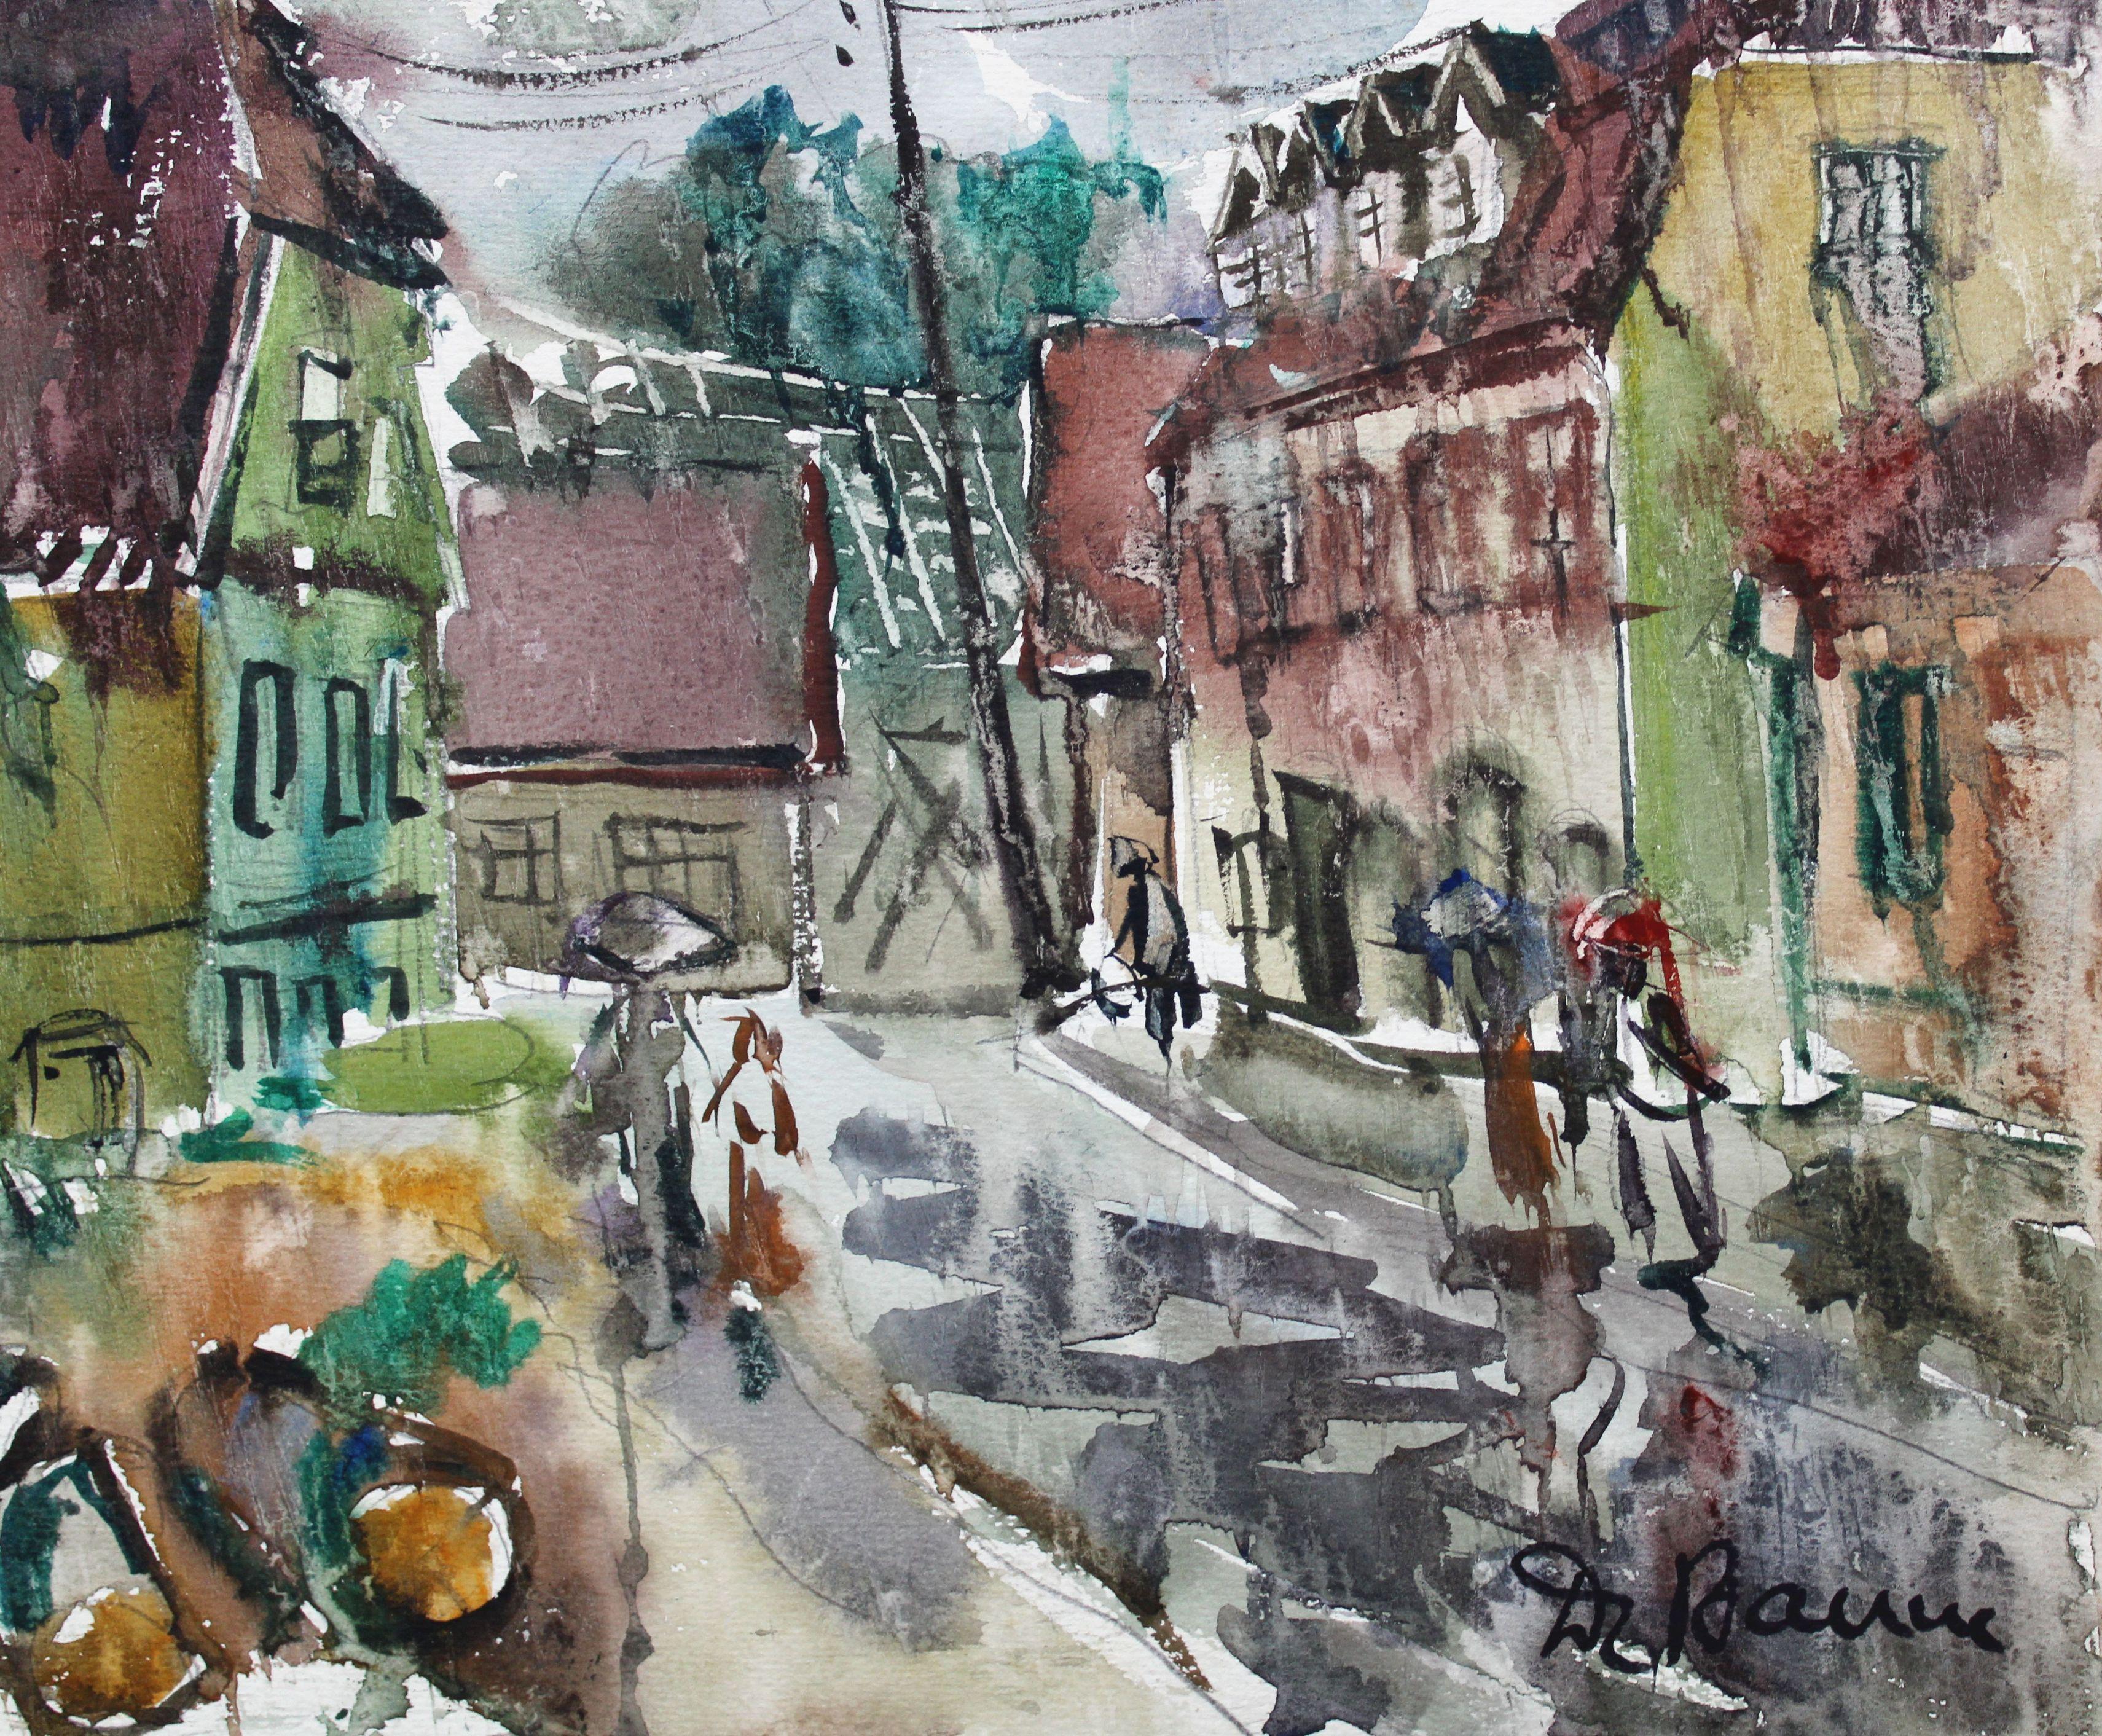 In a small town. 1969, paper, watercolor, 36x48 cm

Dzidra Bauma (1930)

Dzidra Bauma works in watercolor technique. She paint figural compositions, portraits, landscapes, flowers and still life. She is one of the most productive watercolors